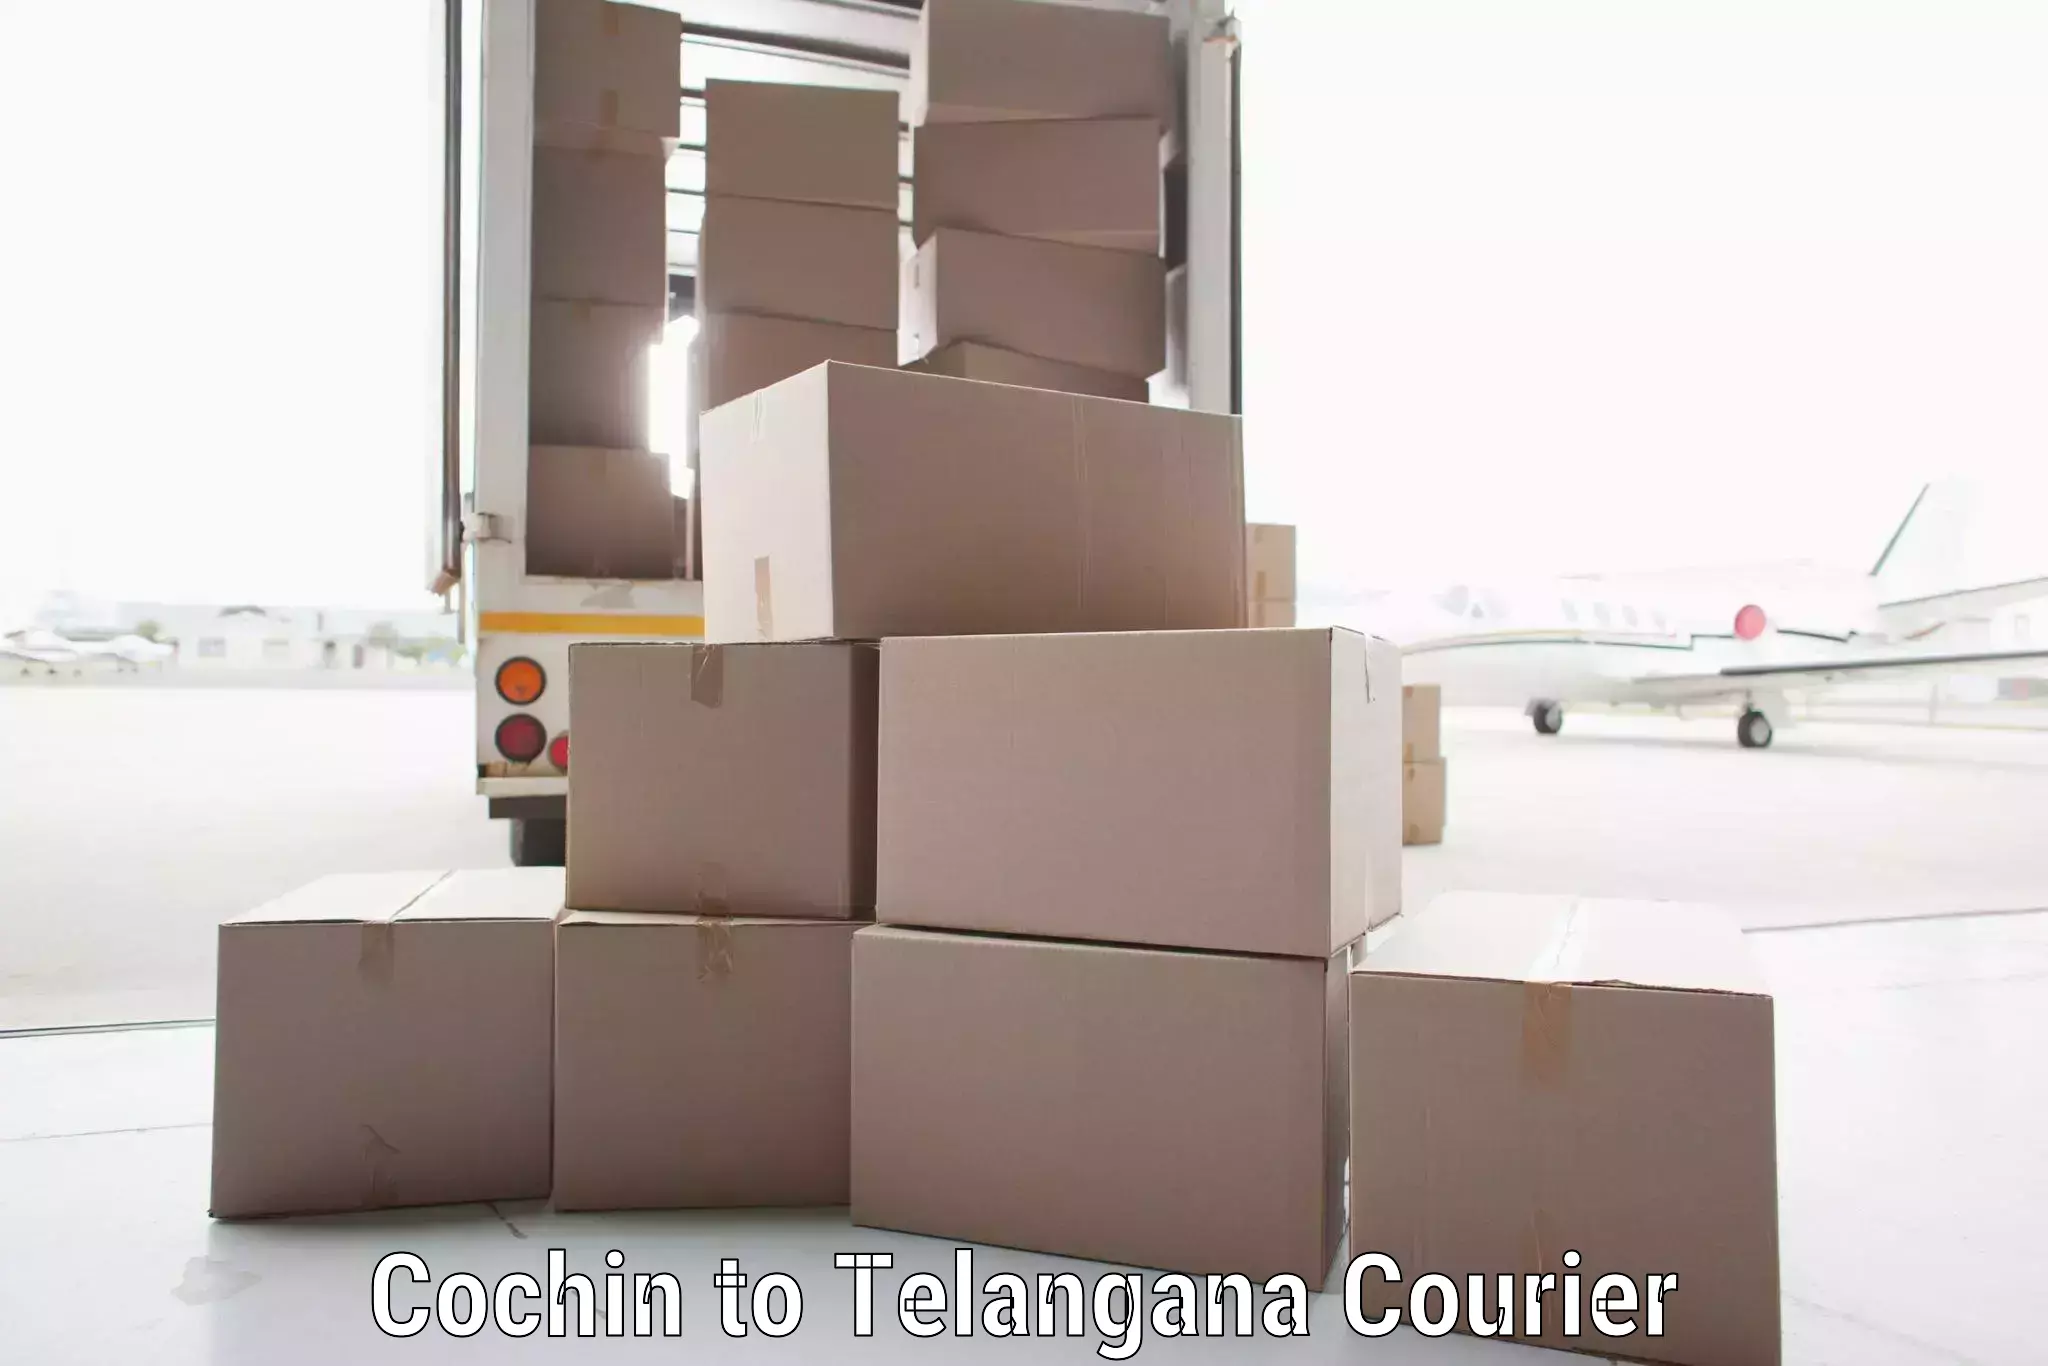 Business delivery service Cochin to Telangana